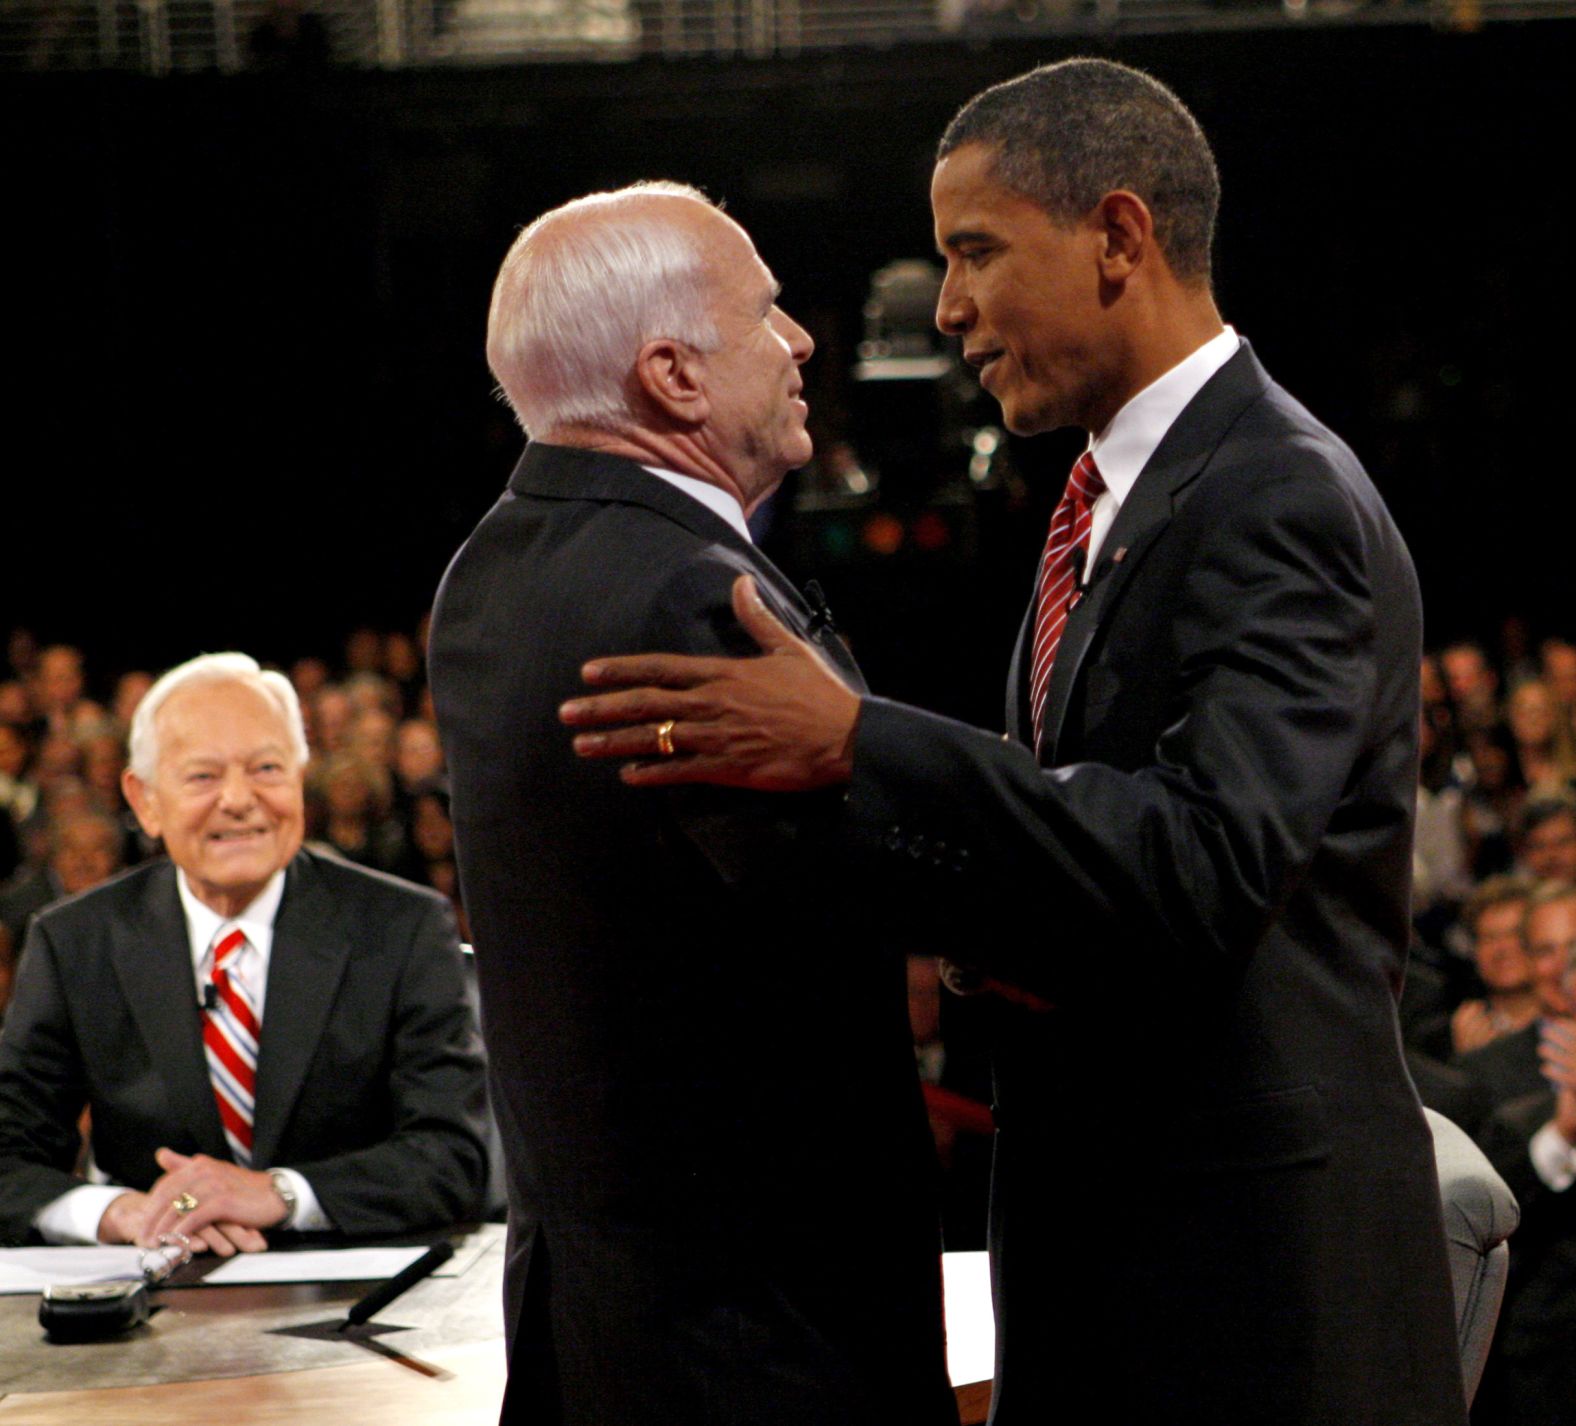 Barack Obama, right, and John McCain shake hands at the start of a presidential debate in 2008.